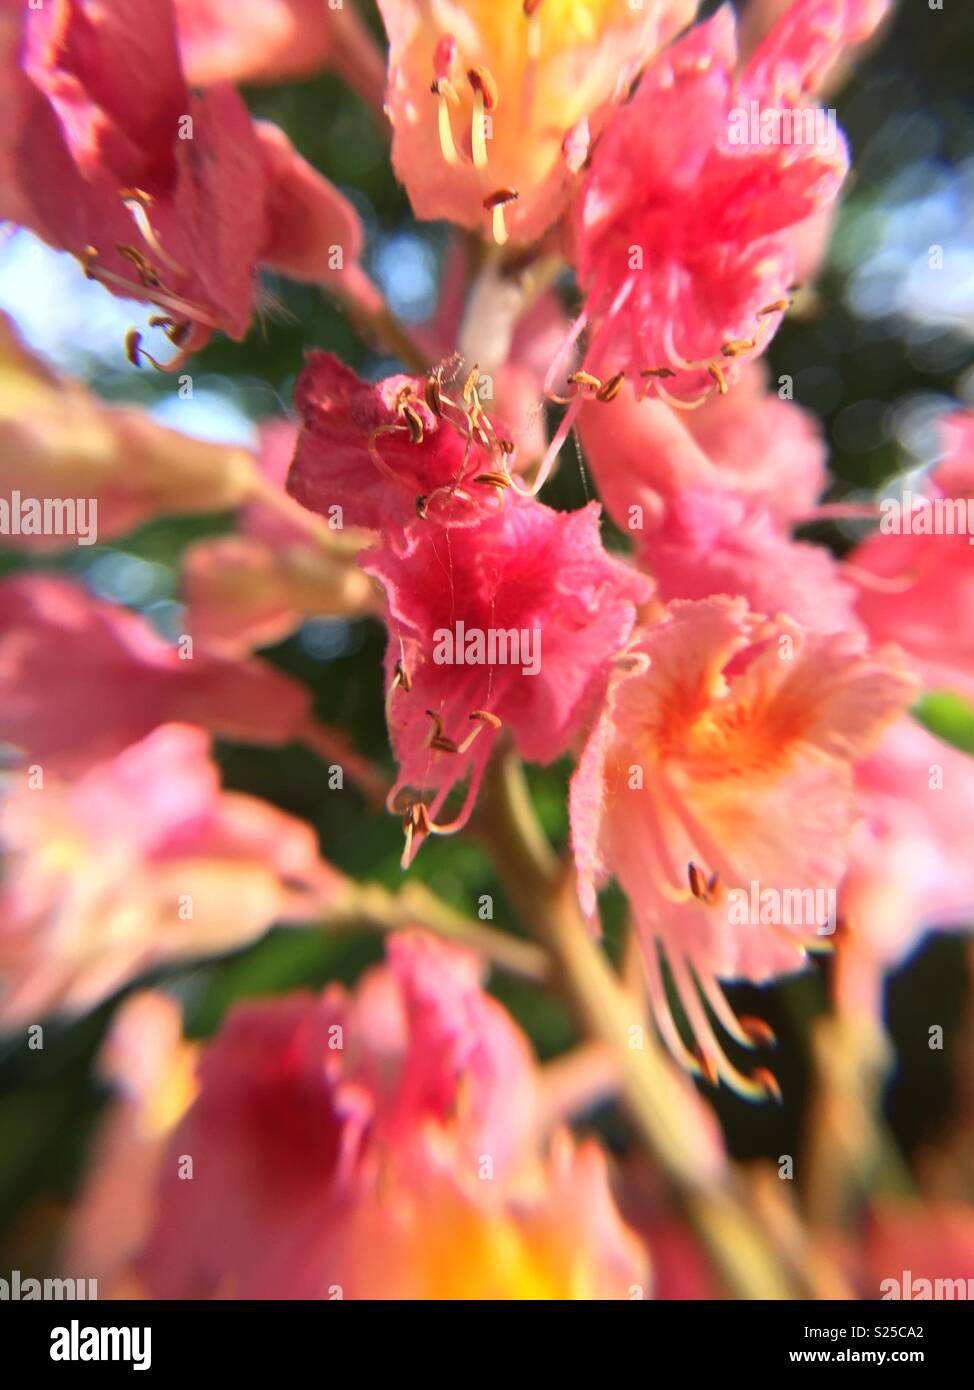 Type of rhododendron flower. Photographed using an iPhone 6 with an attached magnifying lens. Stock Photo